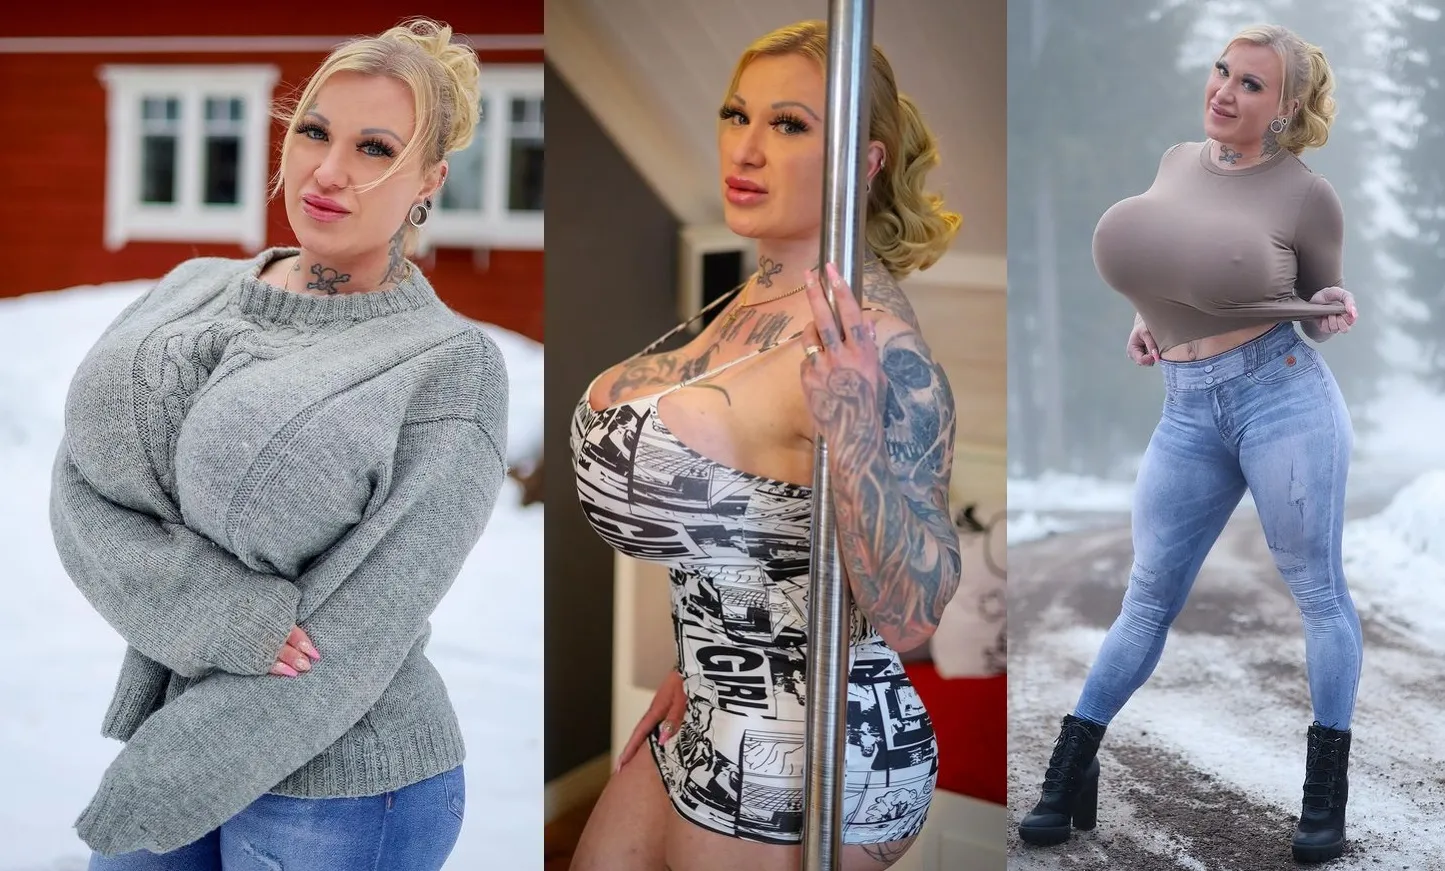 Sonja the woman with biggest boobs in Finland shared a special video message